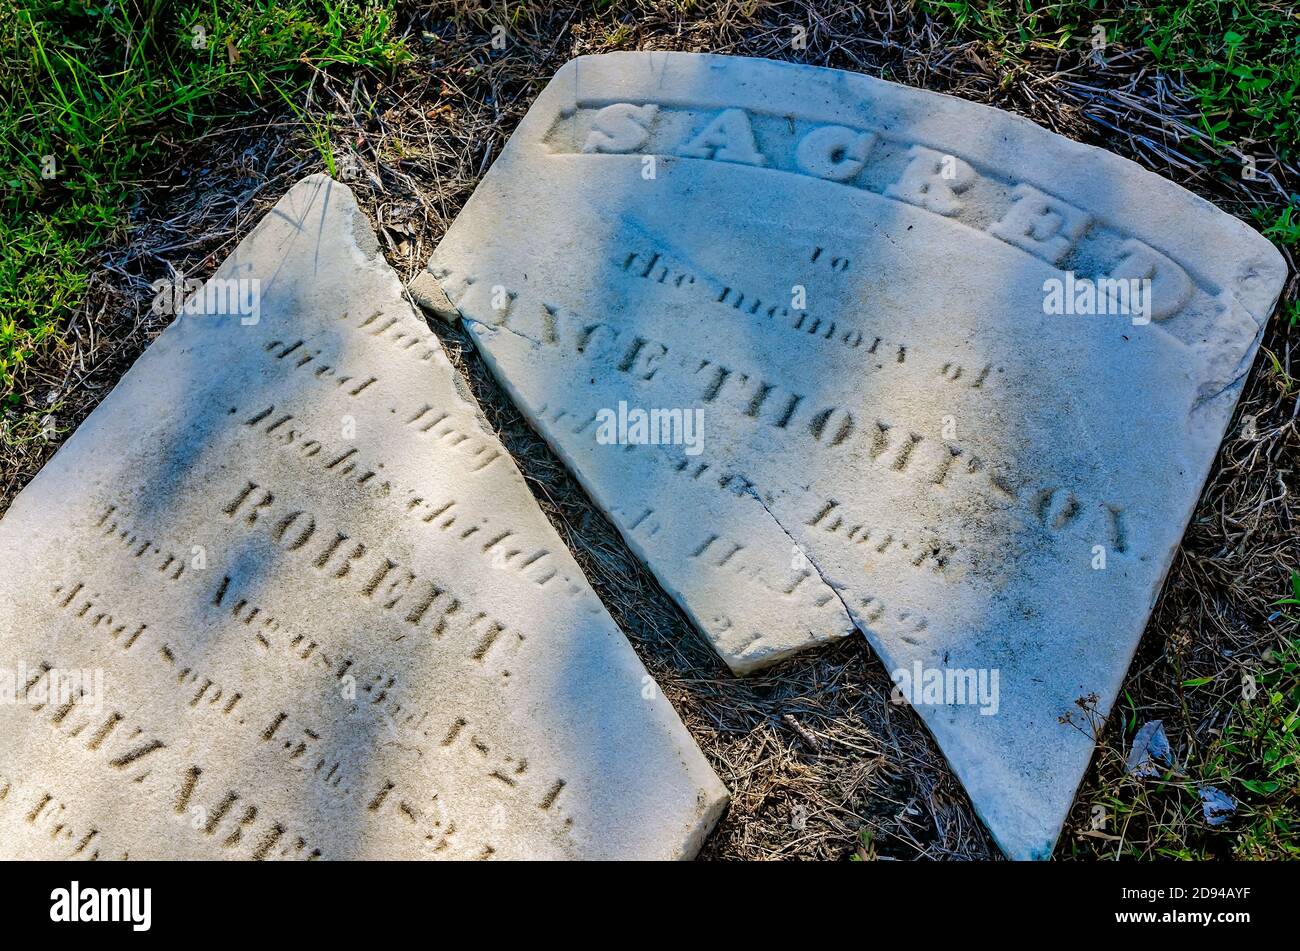 An ornate concrete headstone dating to 1831 lays broken in Church Street Graveyard, Oct. 31, 2020, in Mobile, Alabama. Stock Photo